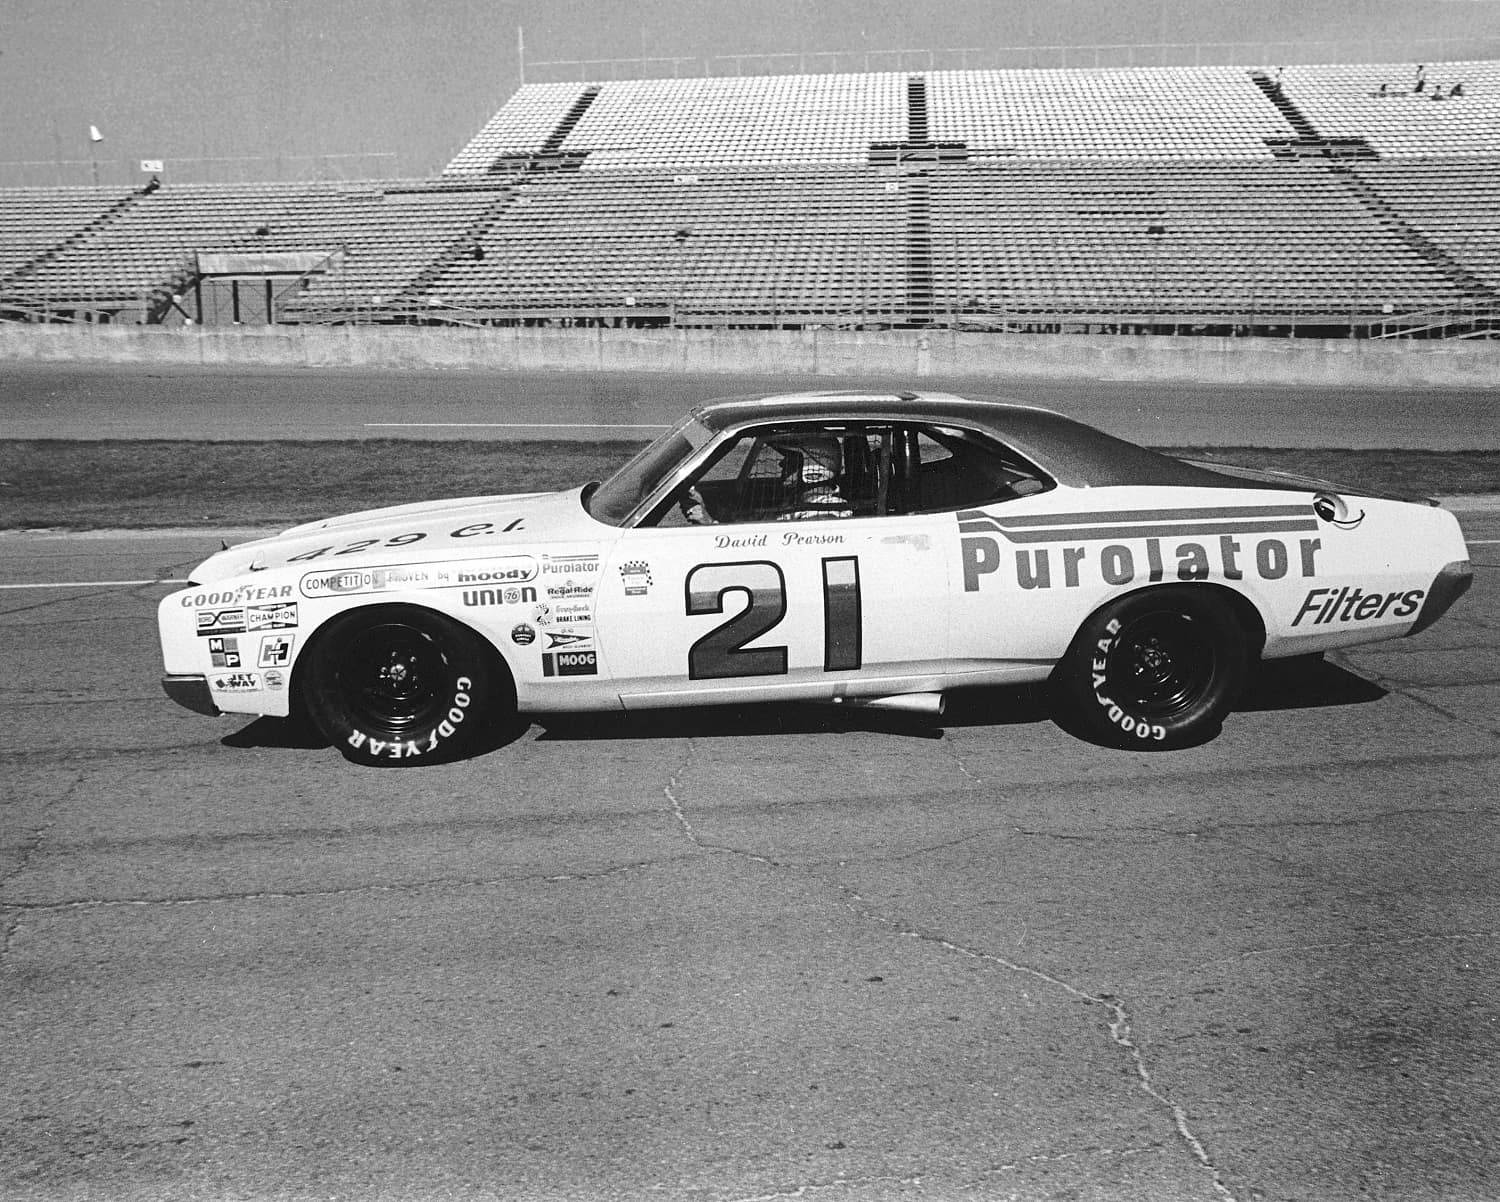 David Pearson behind the wheel of the Wood Brothers Purolator Mercury during a 1973 practice session at Daytona International Speedway. ISC Images & Archives via Getty Images